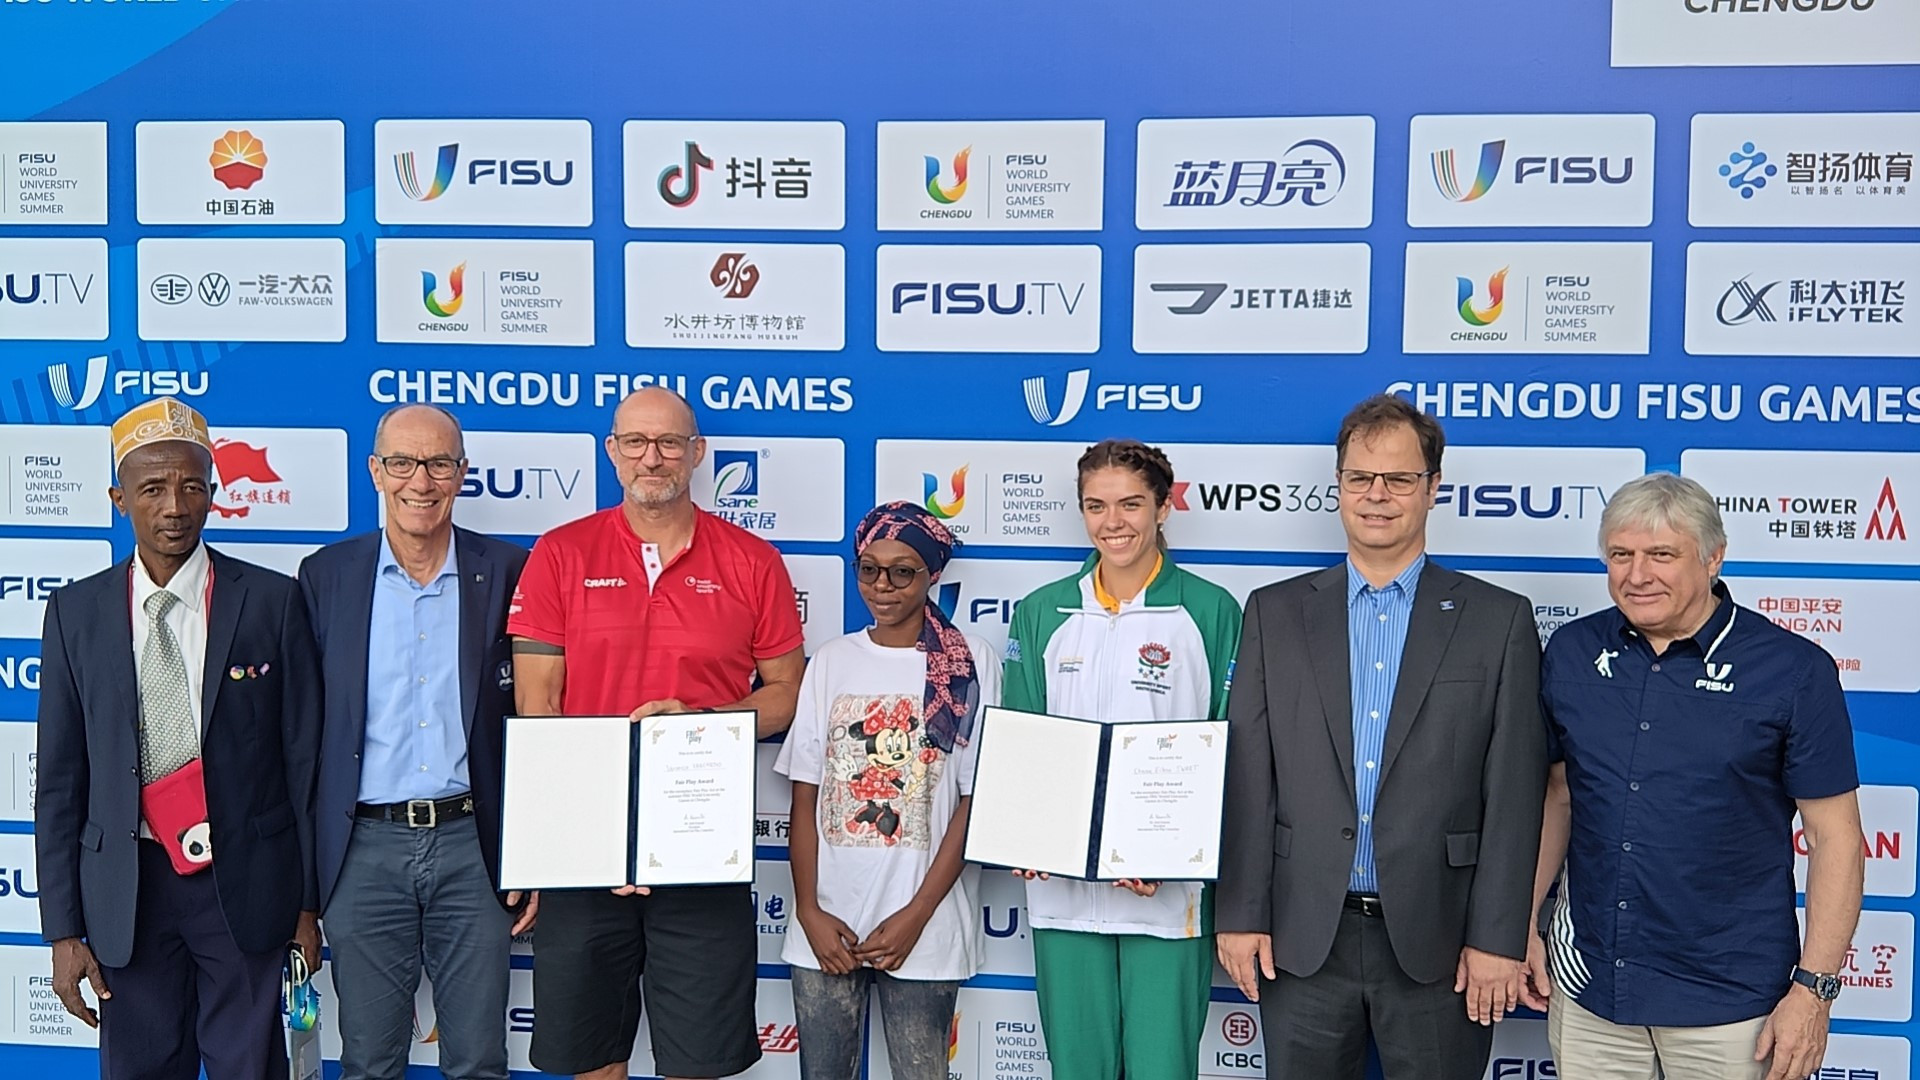 The Chengdu 2021 Fair Play award ceremony at which South Africa's Charne Swart, third right, and a Swiss team official representing Veronica Vancardo received the joint honour for helping Comoros runner Soudi-Thasmy Moussa, centre ©FISU